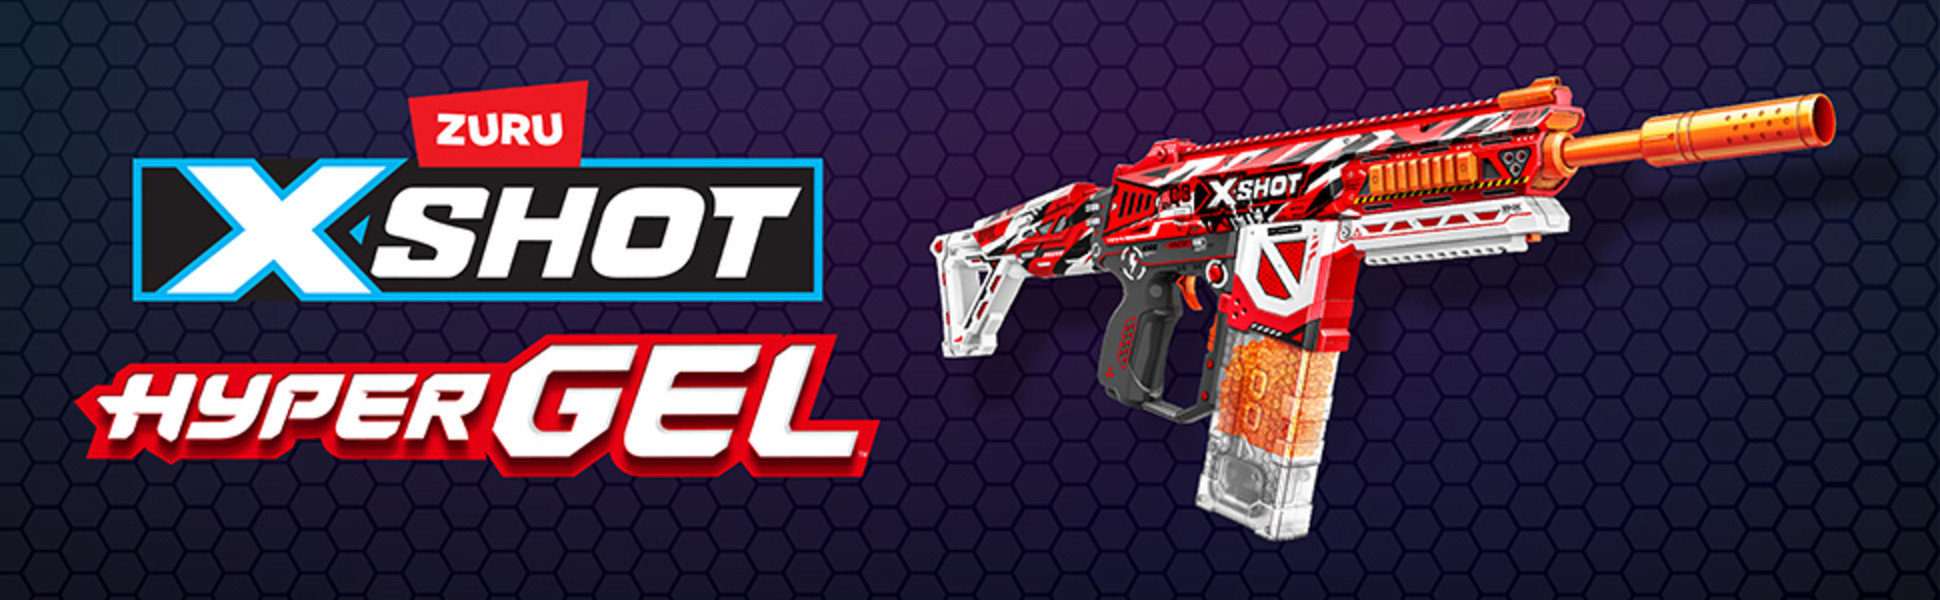 X-Shot HPG-700 Hyper Gel Fully Semi-Automatic Large Blaster, Ages 14+